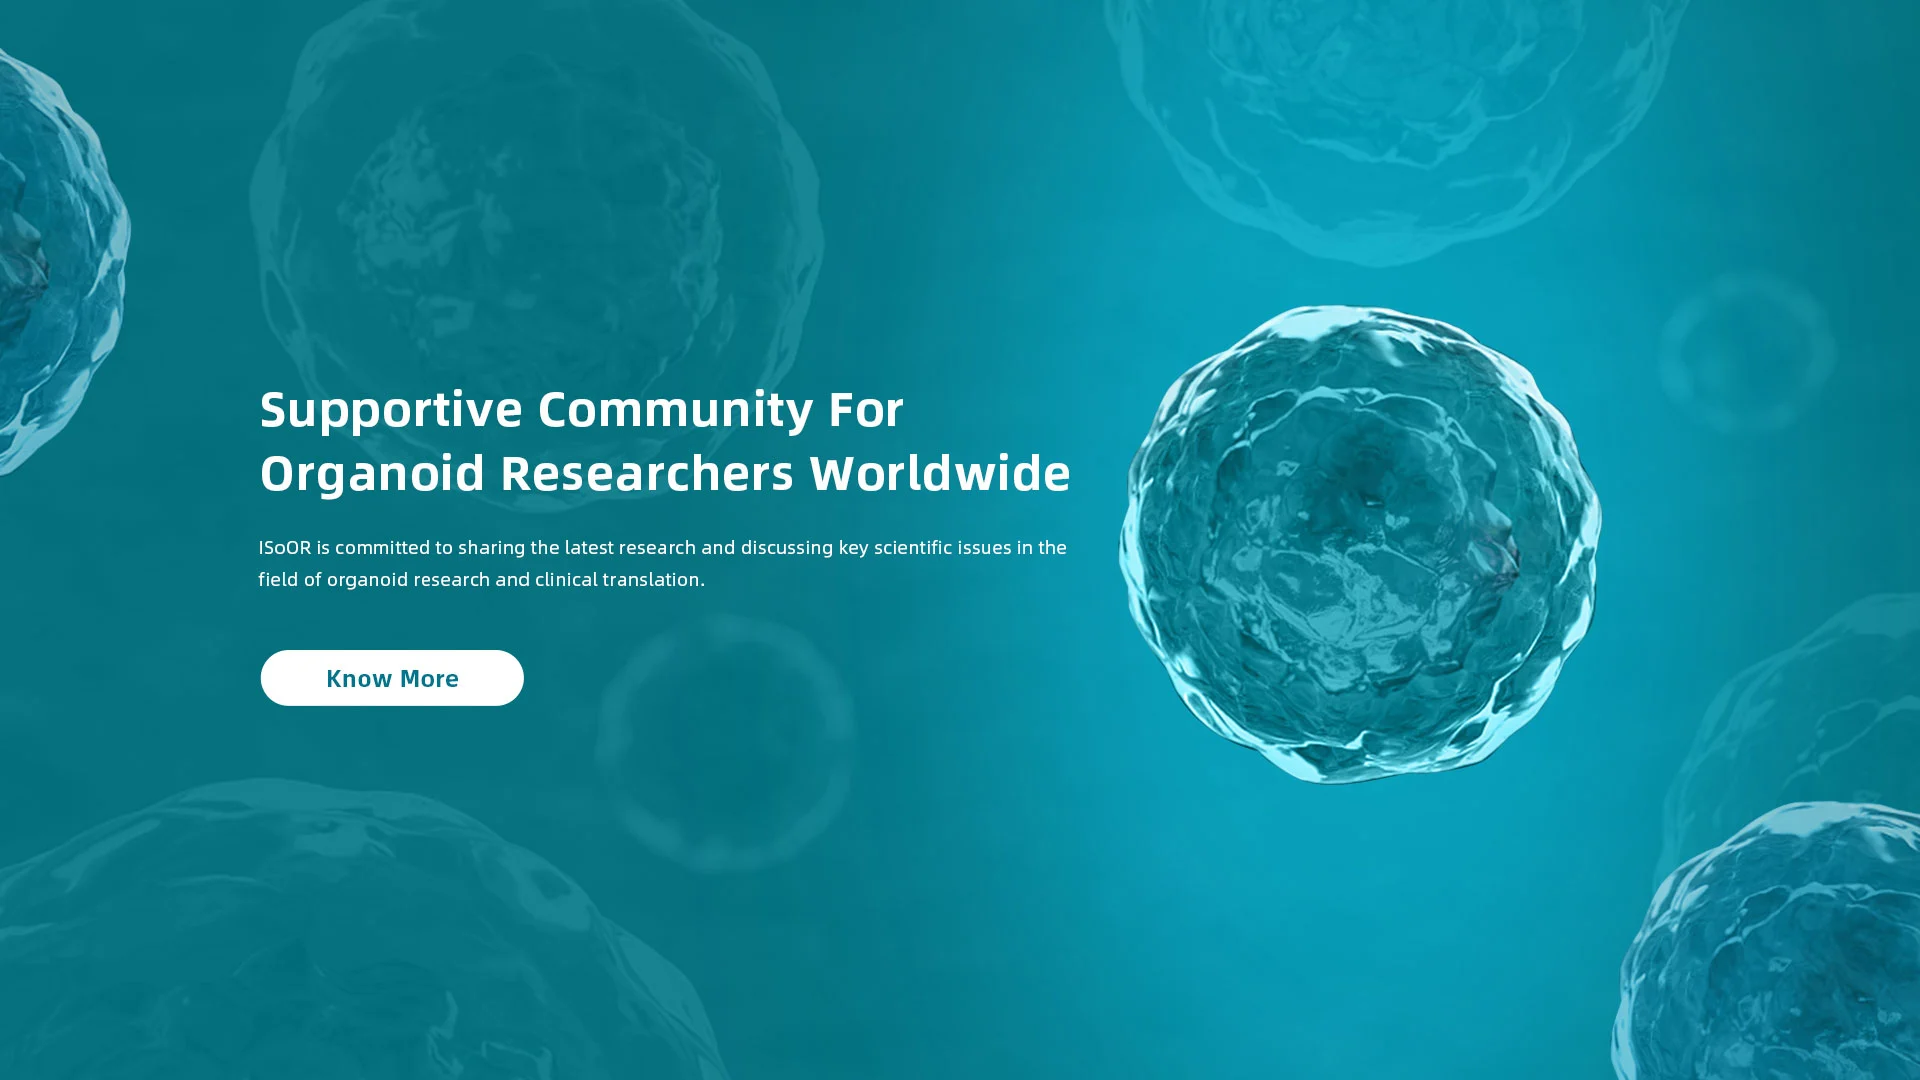 Supportive Community For Organoid Researchers Worldwide